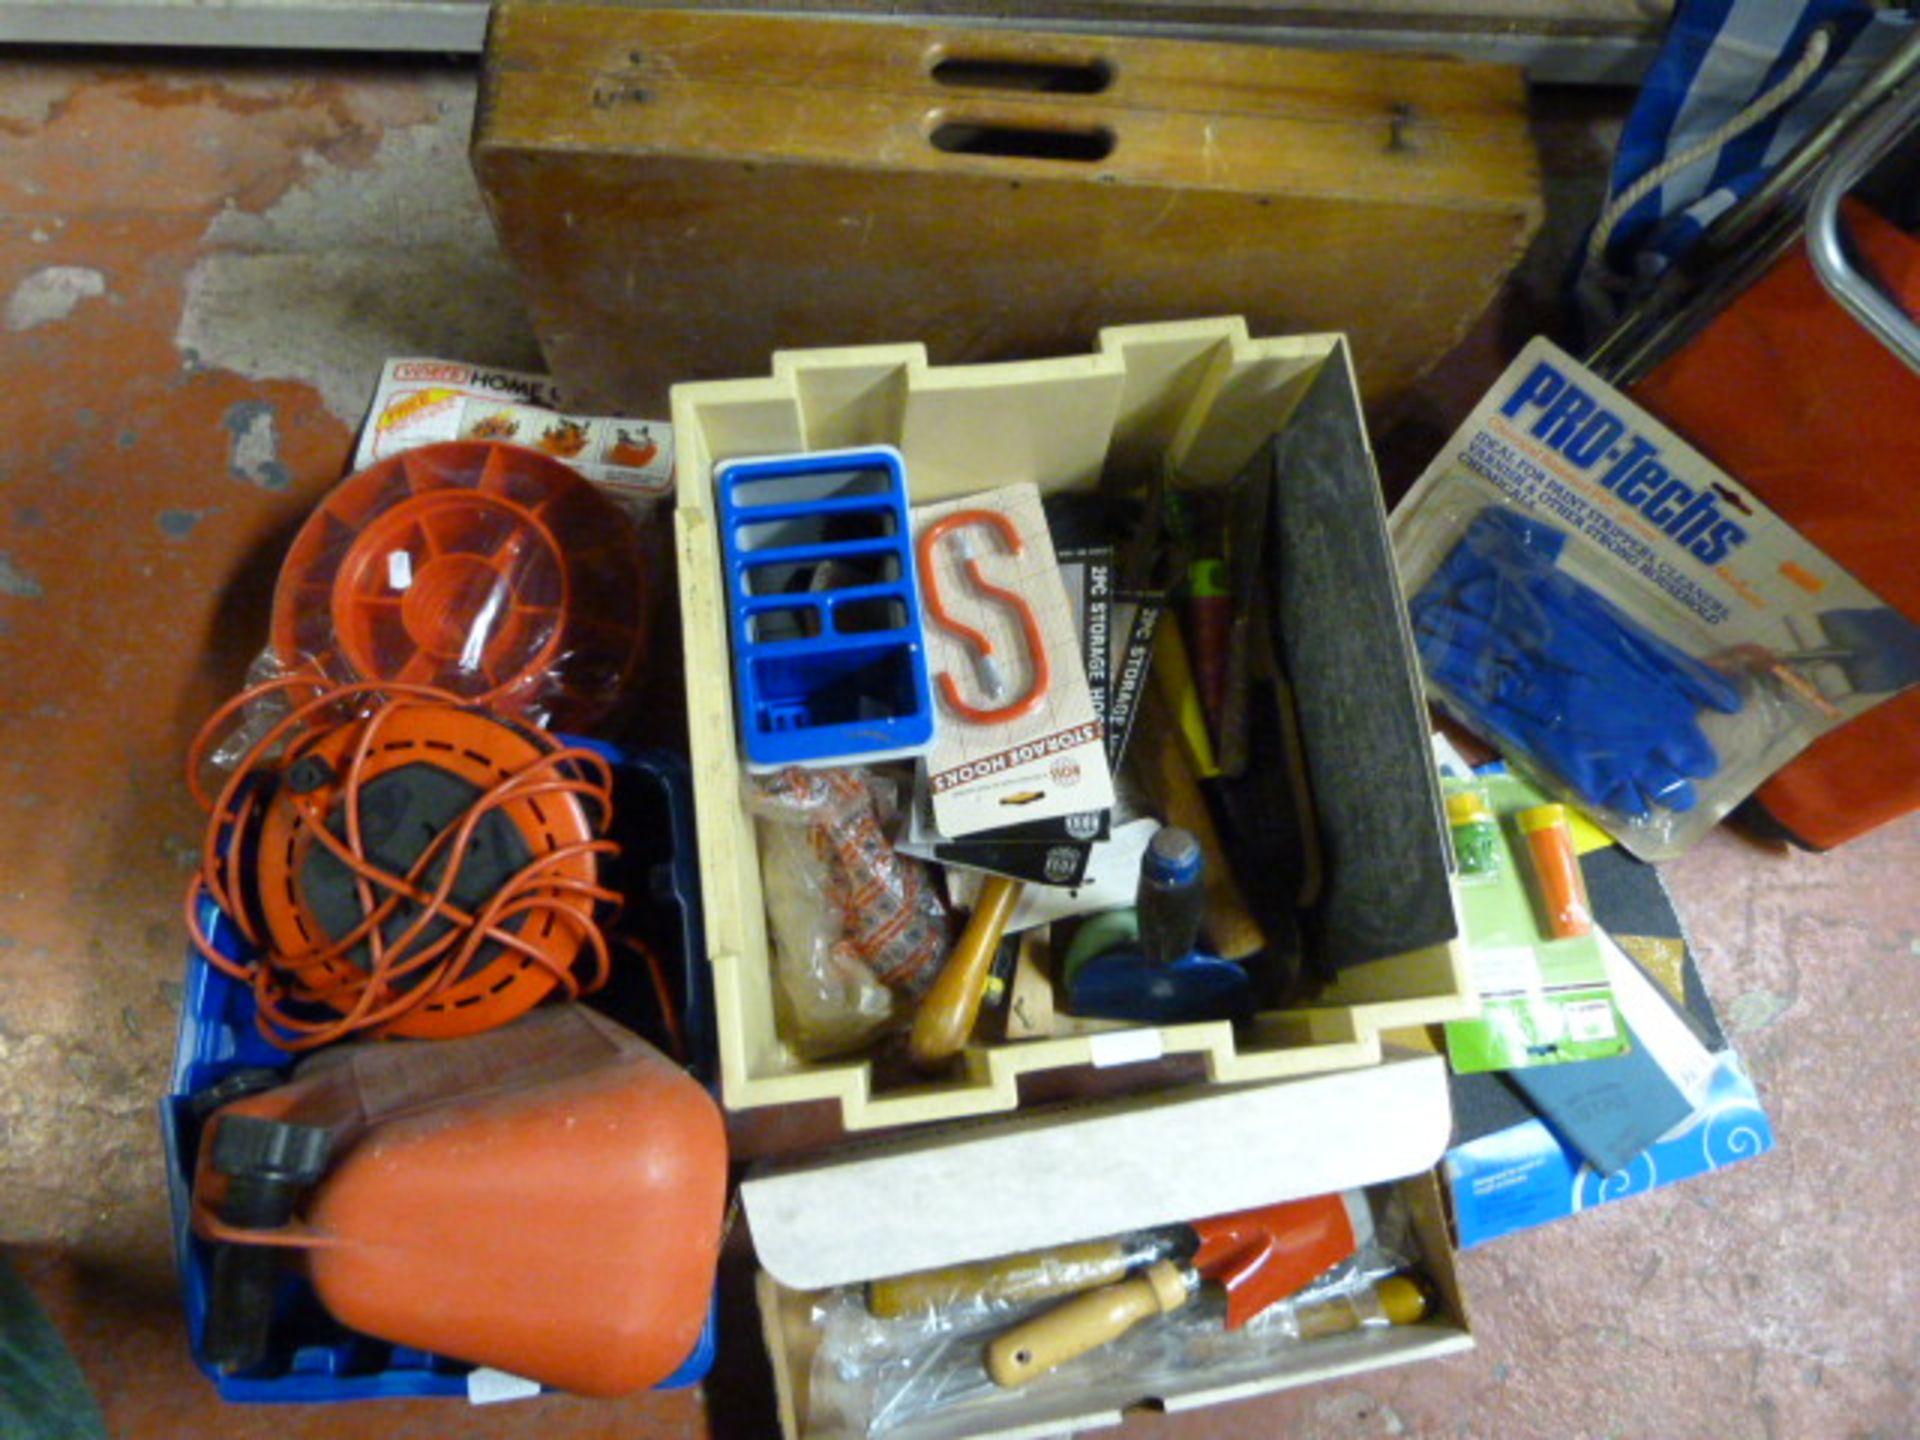 Small Folding Table and Two Boxes of Tools and Fit